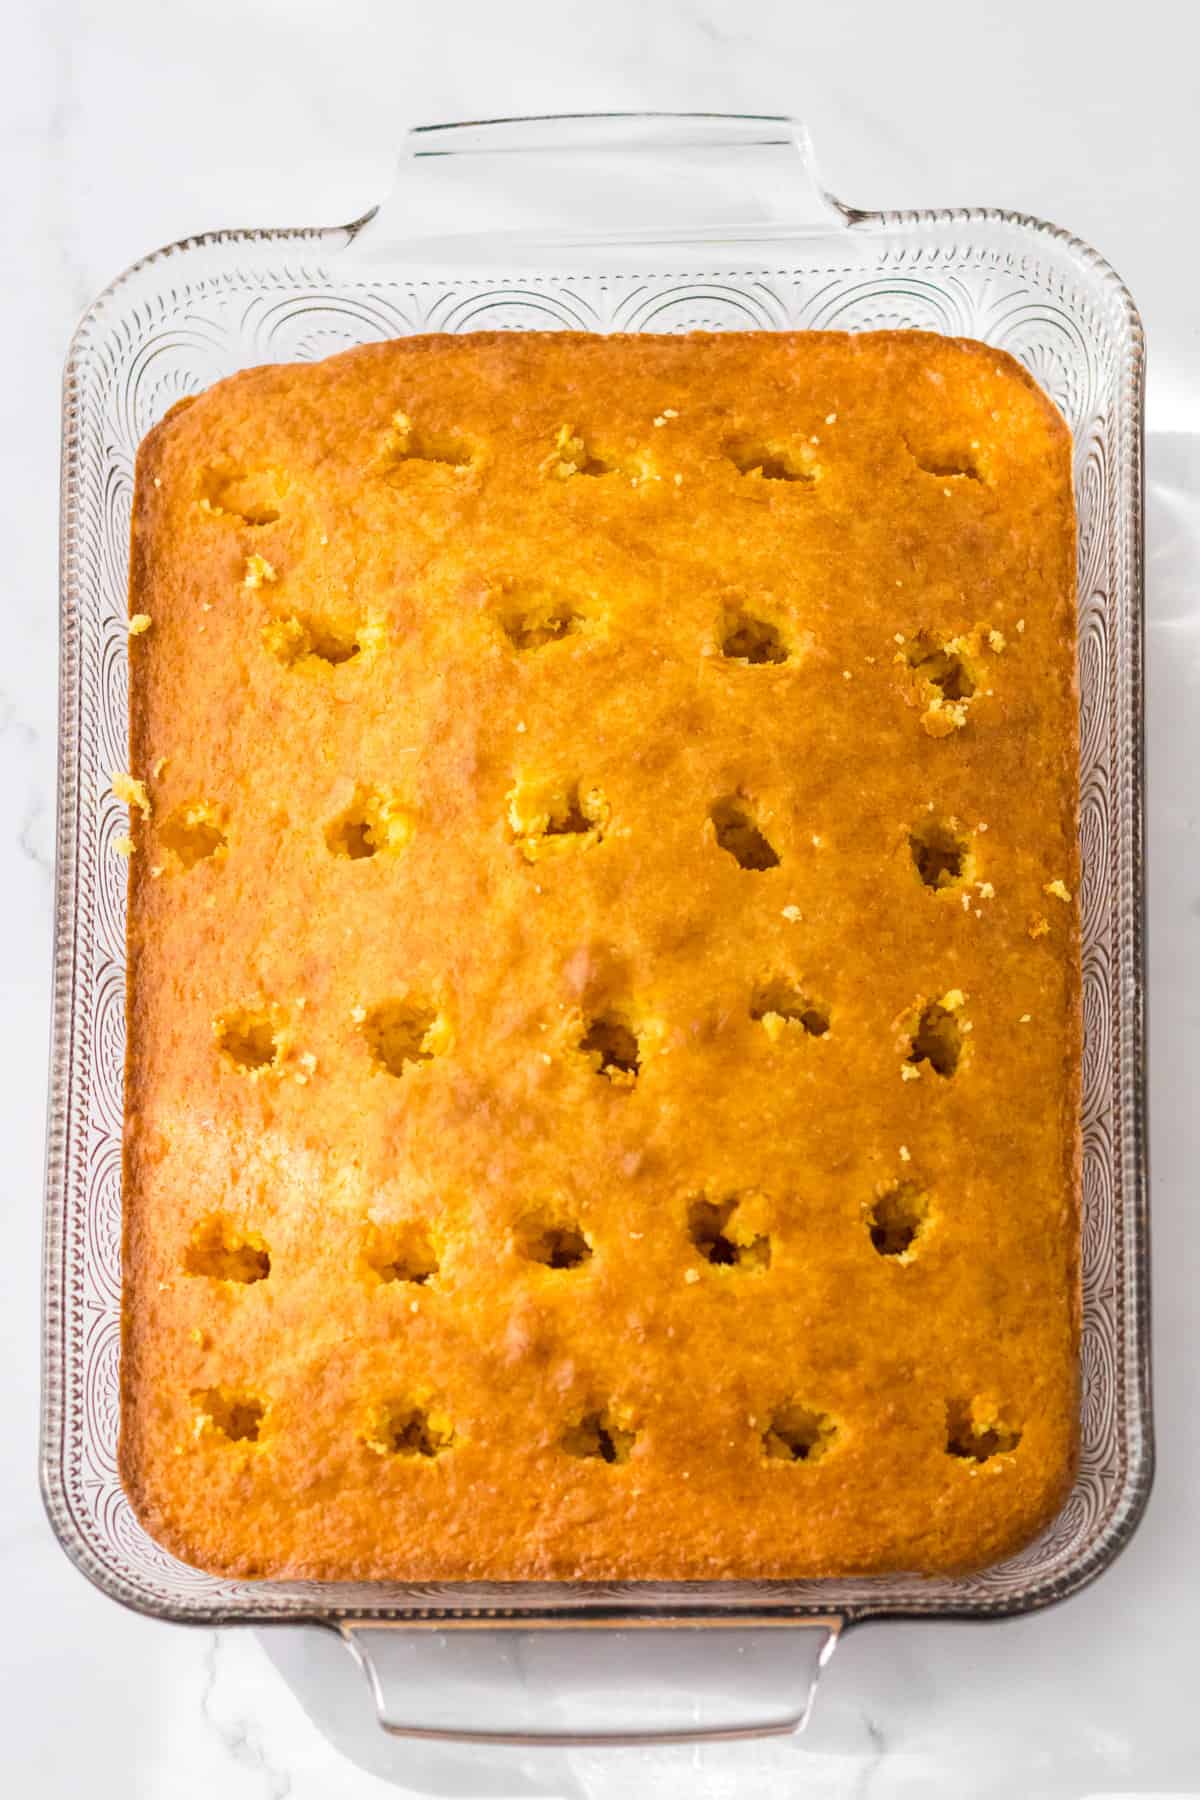 Rectangular yellow cake with holes poked throughout golden brown top.